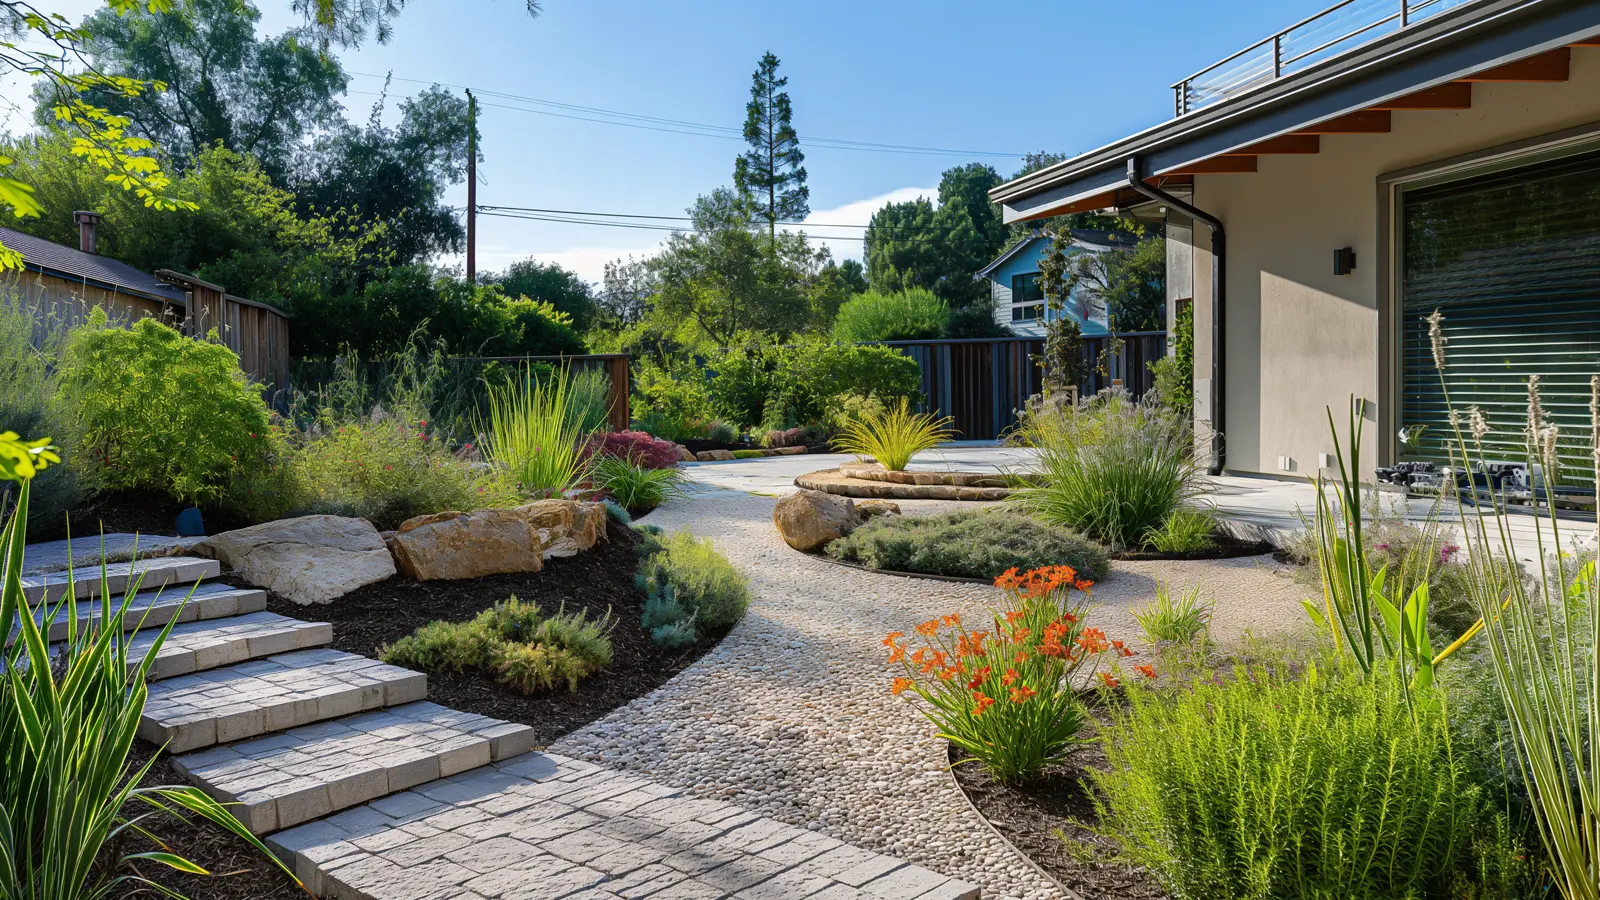 Practices for Environmentally Friendly Landscaping